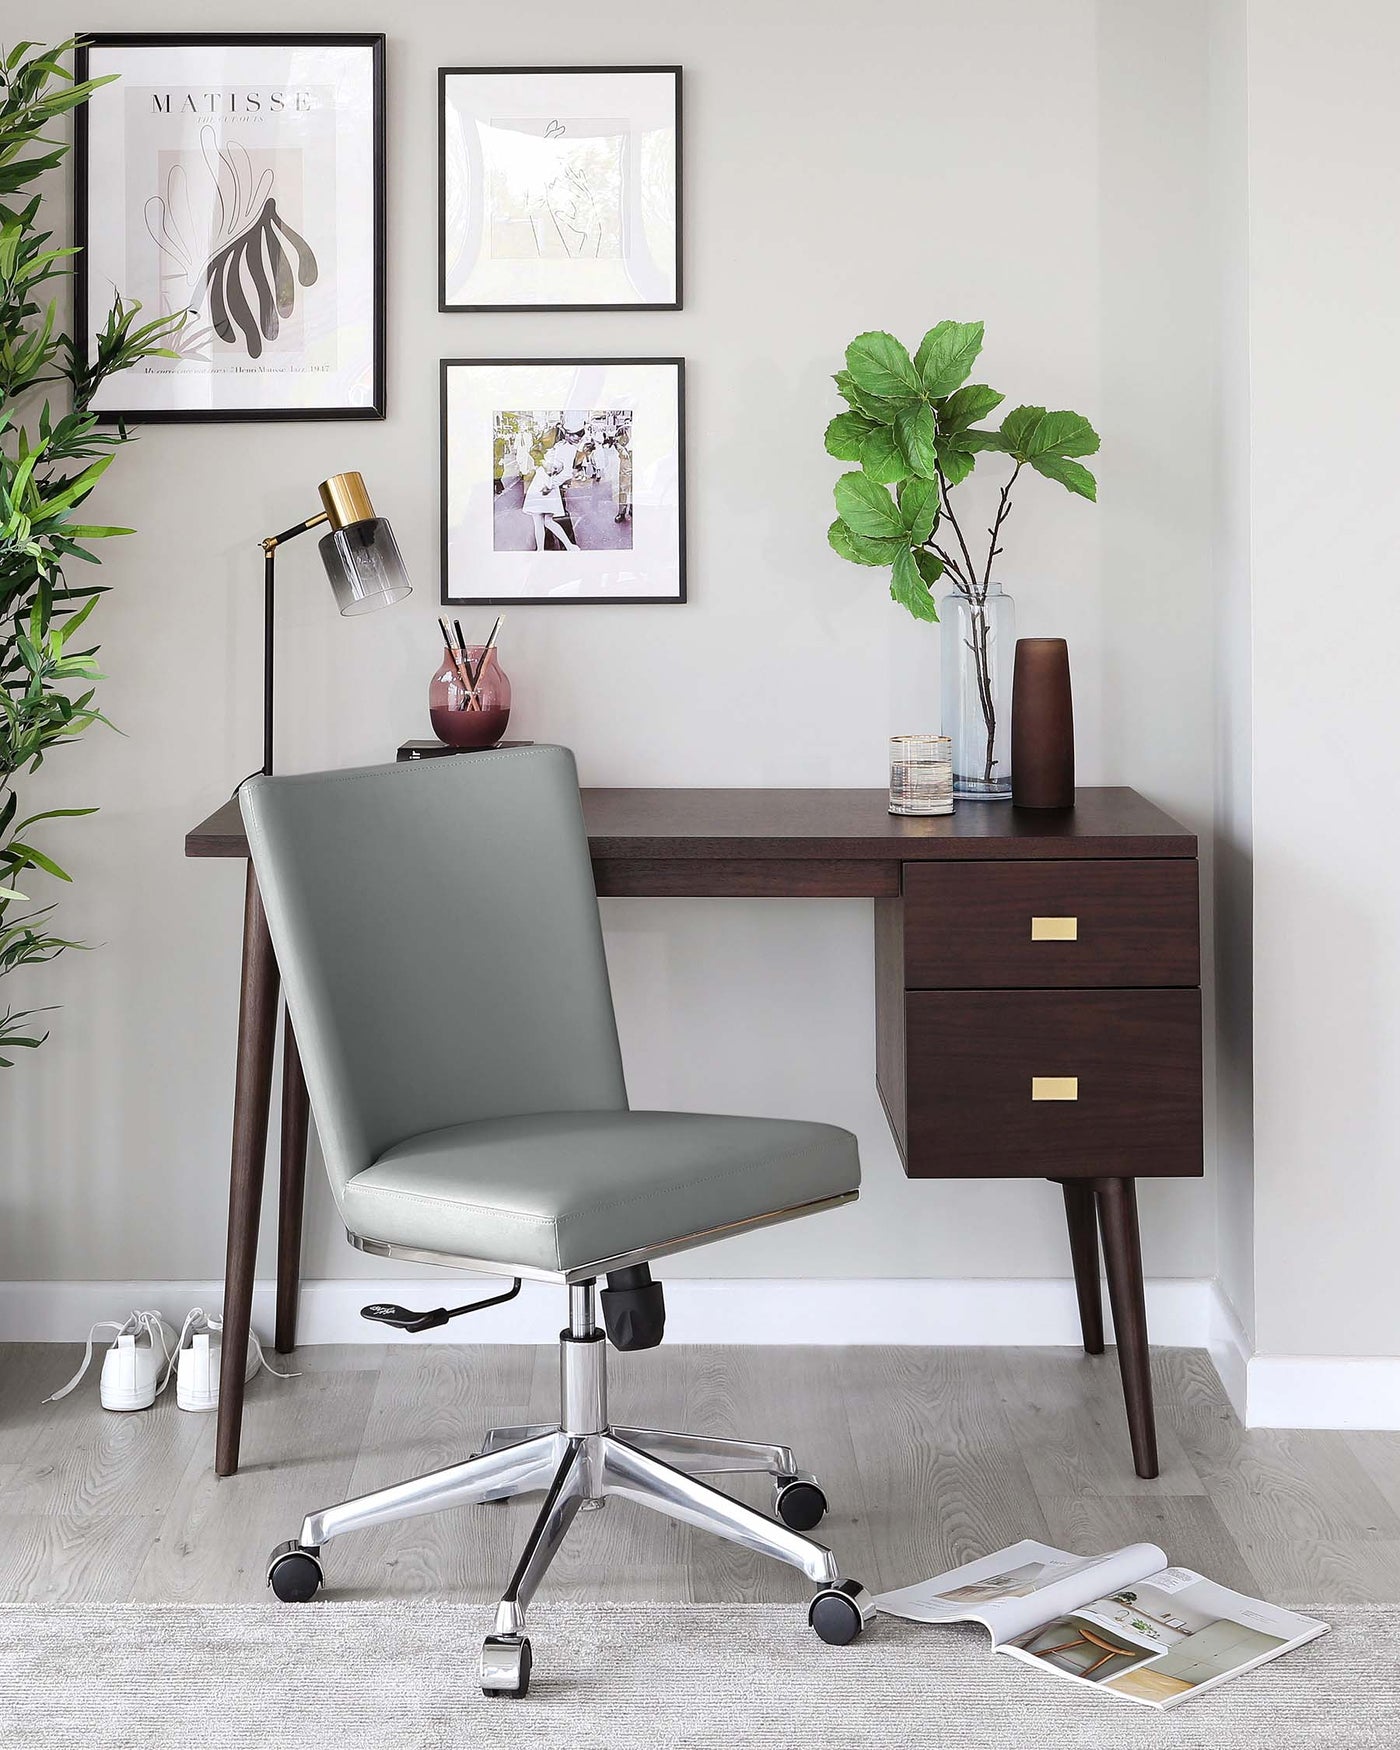 Modern home office setup featuring a sleek dark wooden writing desk with two drawers and brass handles. An ergonomic adjustable office chair with grey upholstery and a shiny chrome base with wheels is positioned in front of the desk. A desk lamp, decorative vase, and small items adorn the tabletop, adding a touch of elegance to the space.